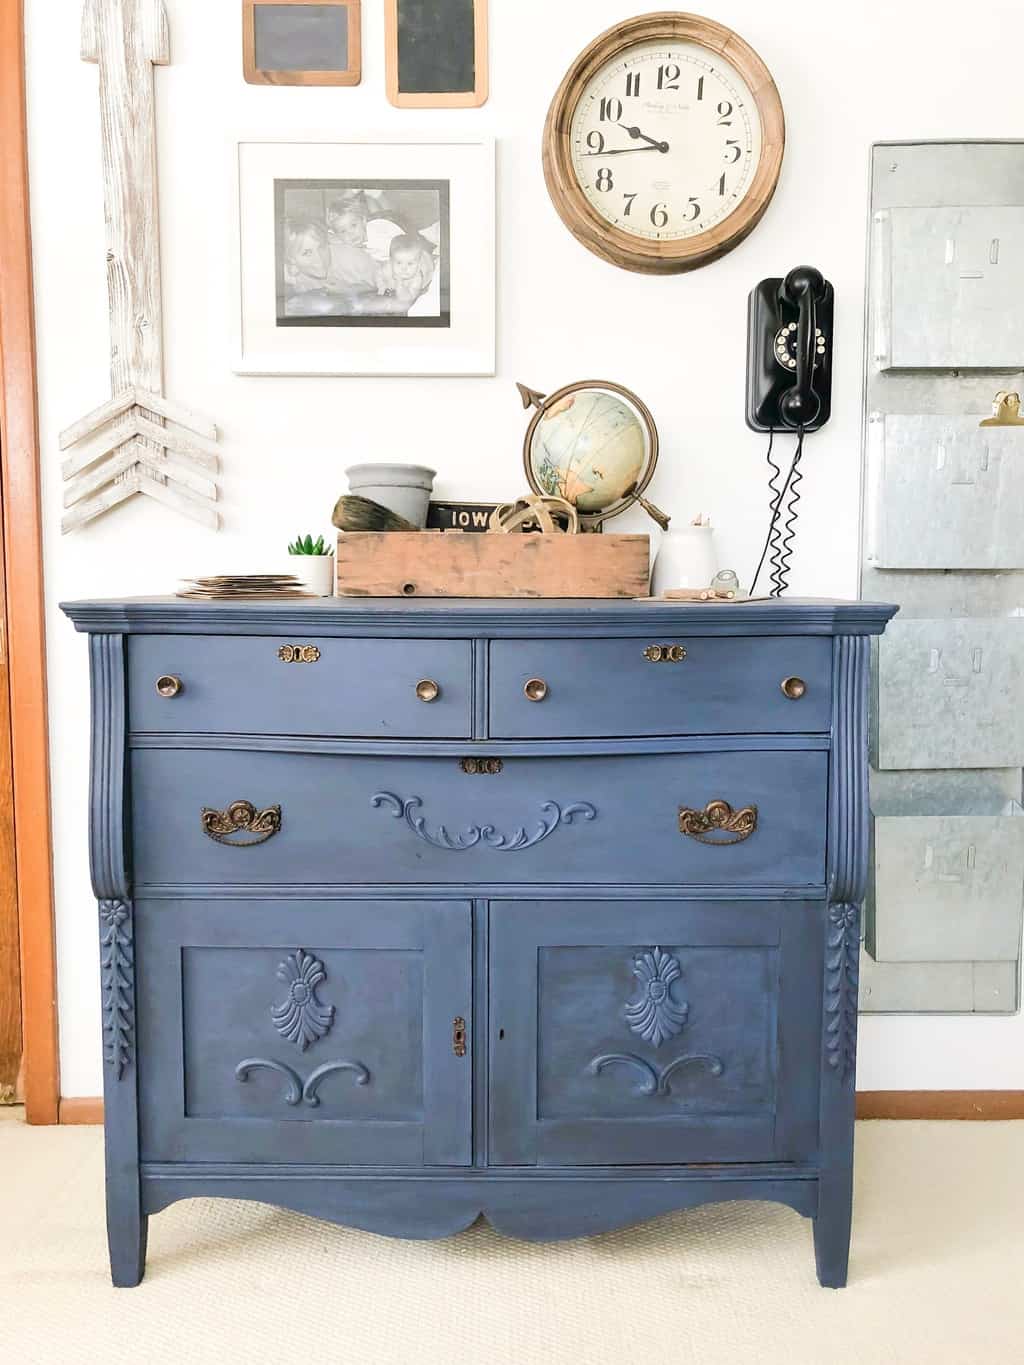 If you are looking for a beautiful blue dresser, click over to see how to DIY an old dresser into a glazed blue dresser beauty!